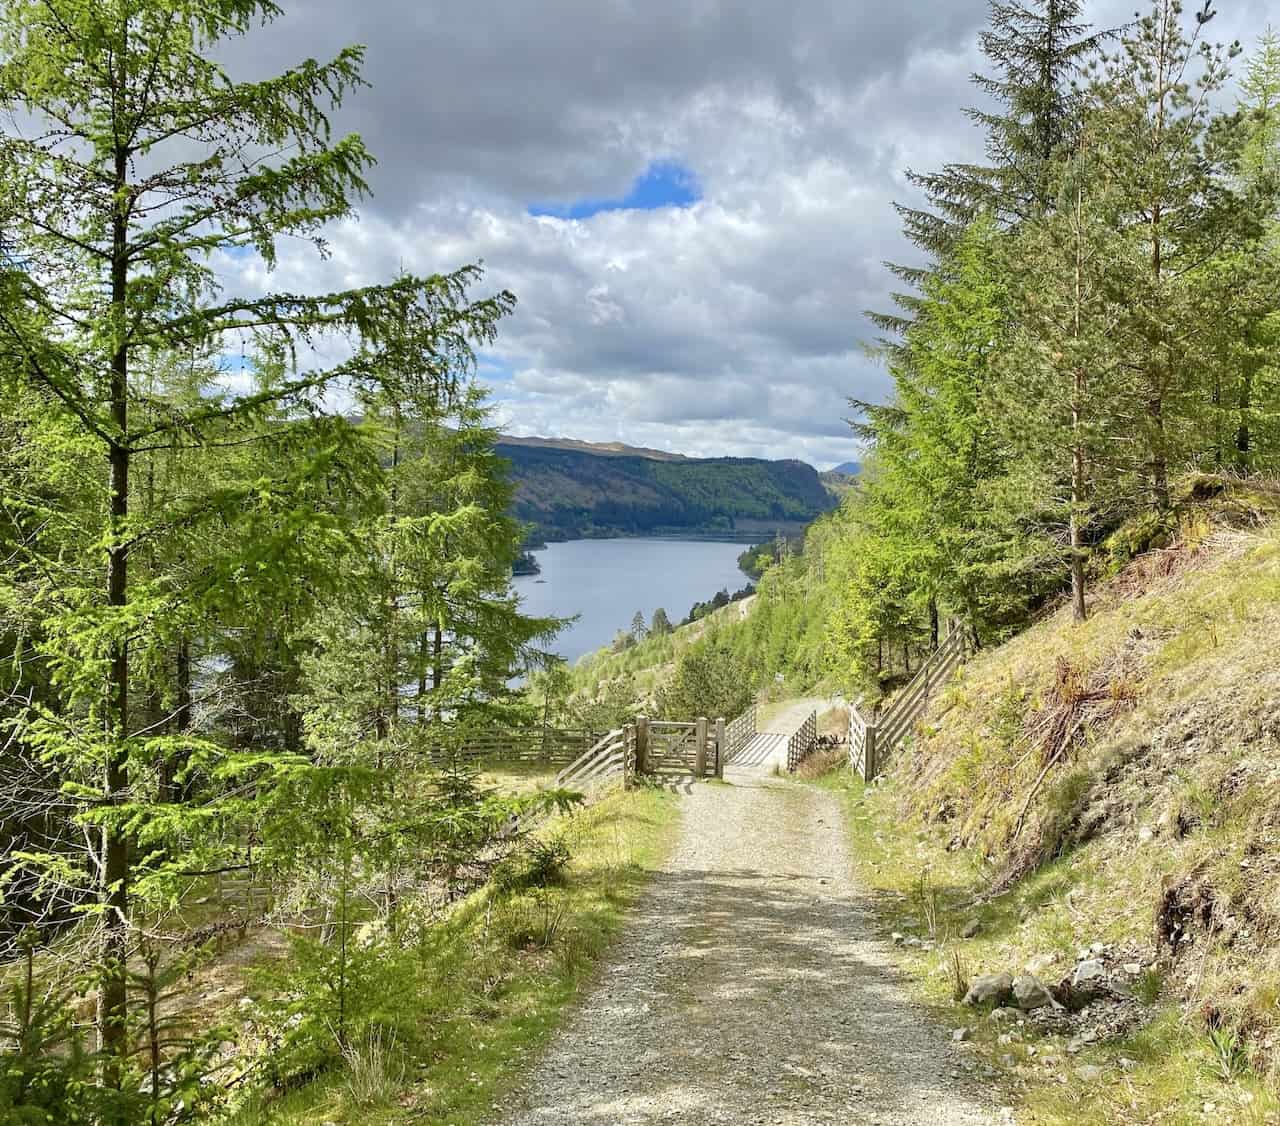 Woodland track below Helvellyn on the east side of Thirlmere.